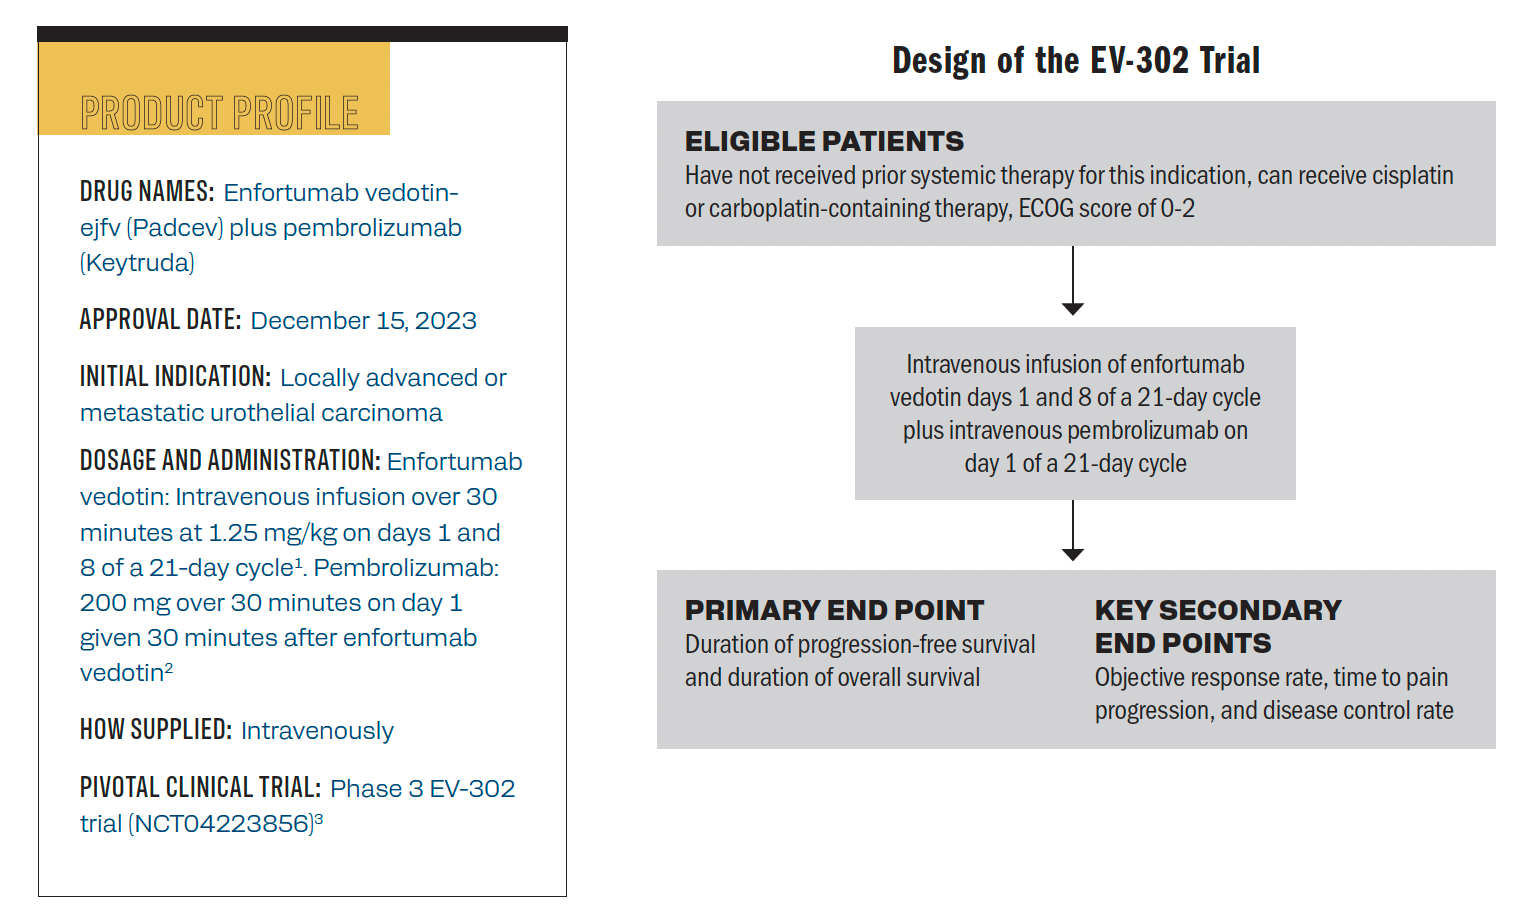 The product profile of enfortumab vedotin and trial design of the phase 3 EV-302 trial. 